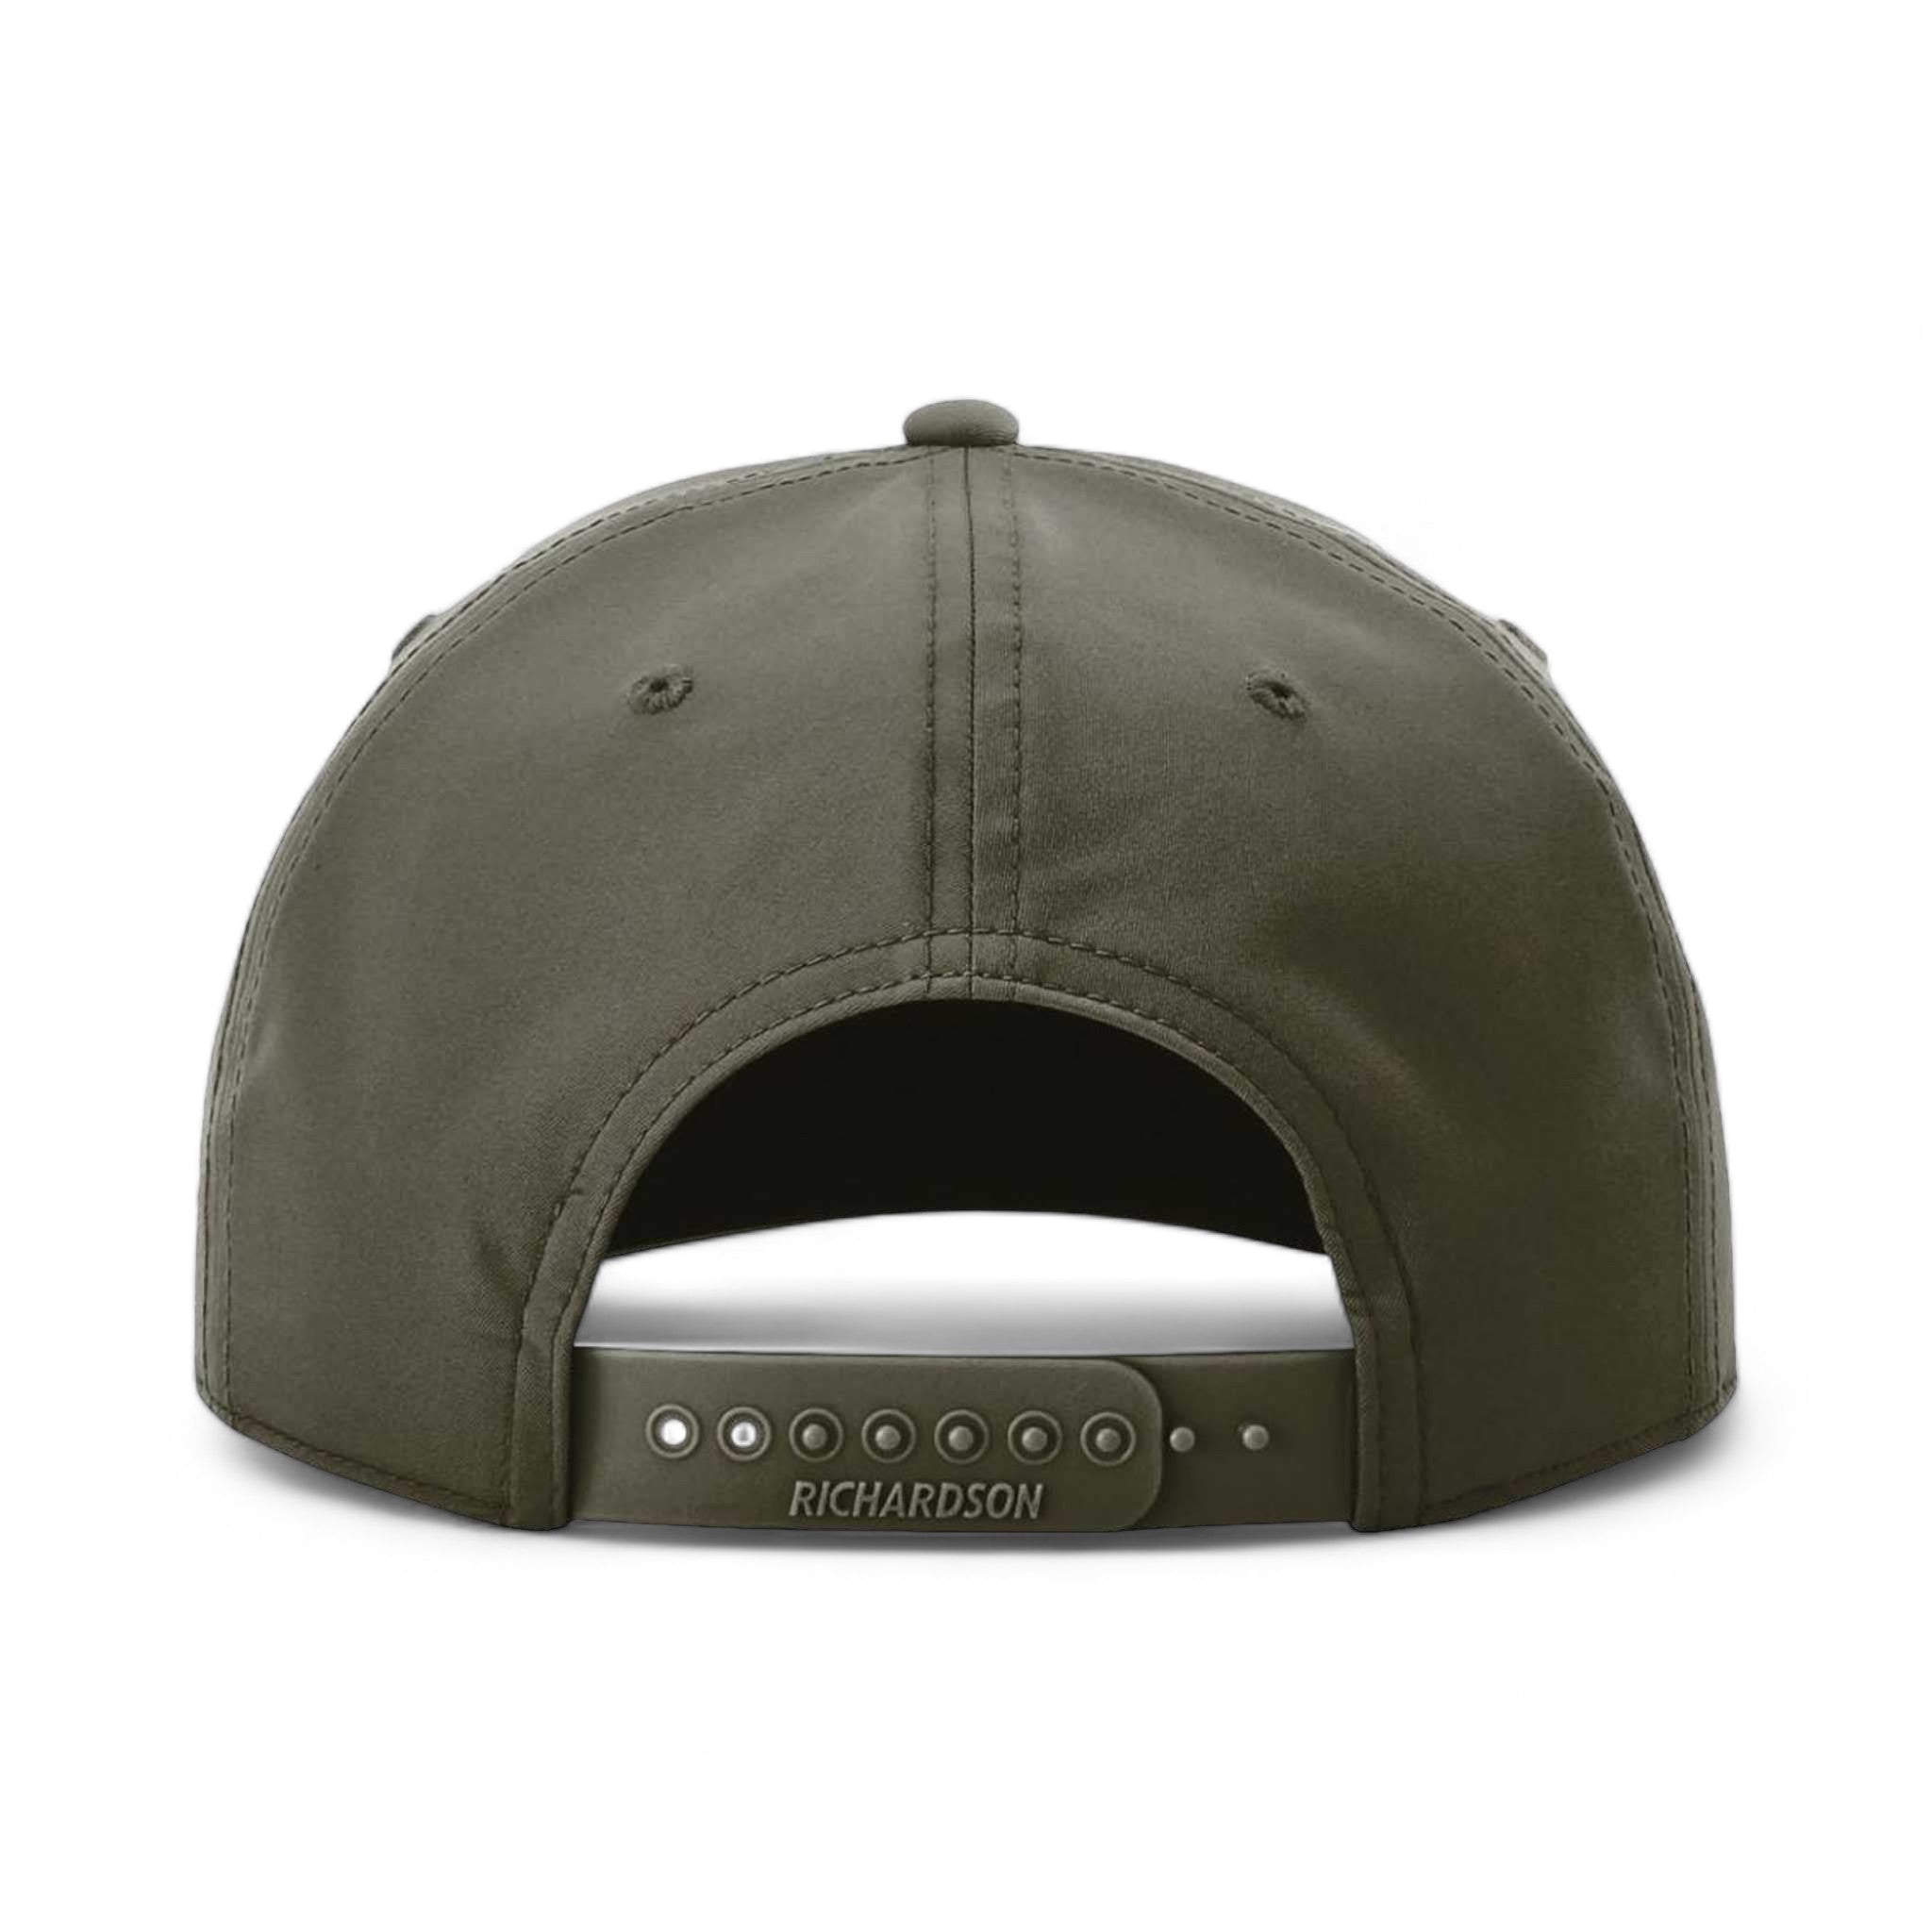 Back view of Richardson 258 custom hat in dark olive green and white